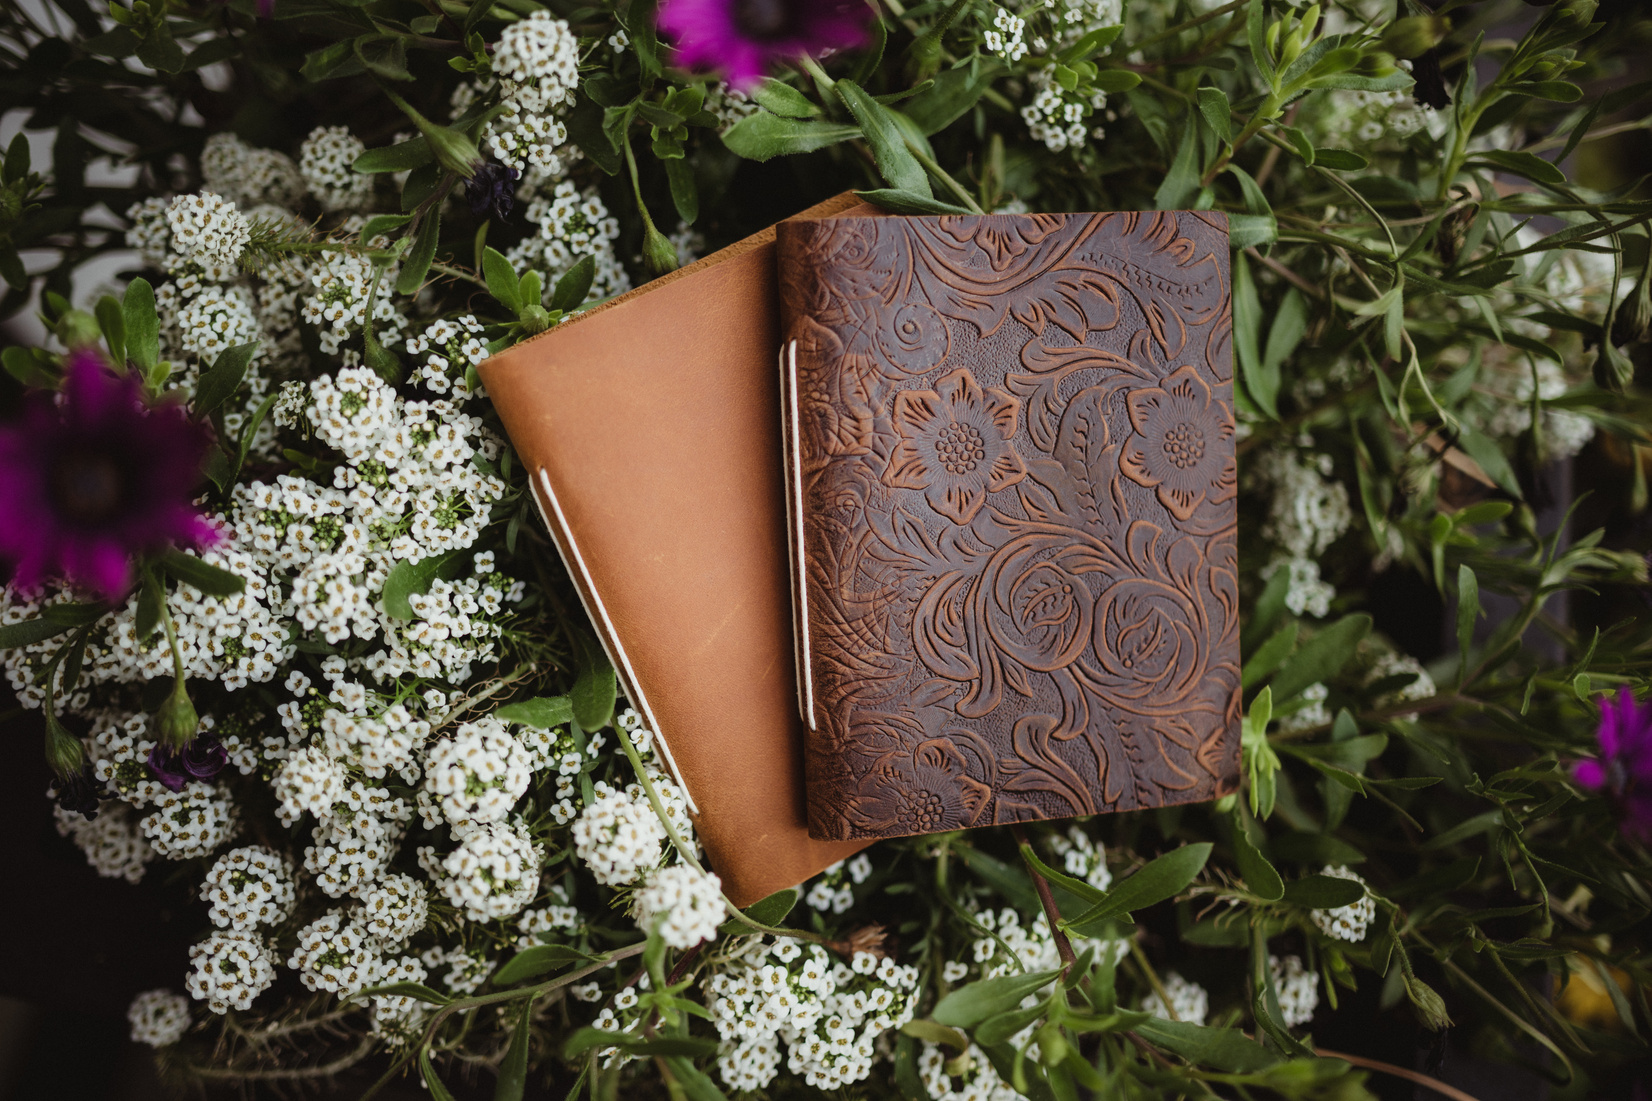 Leather journals outdoors